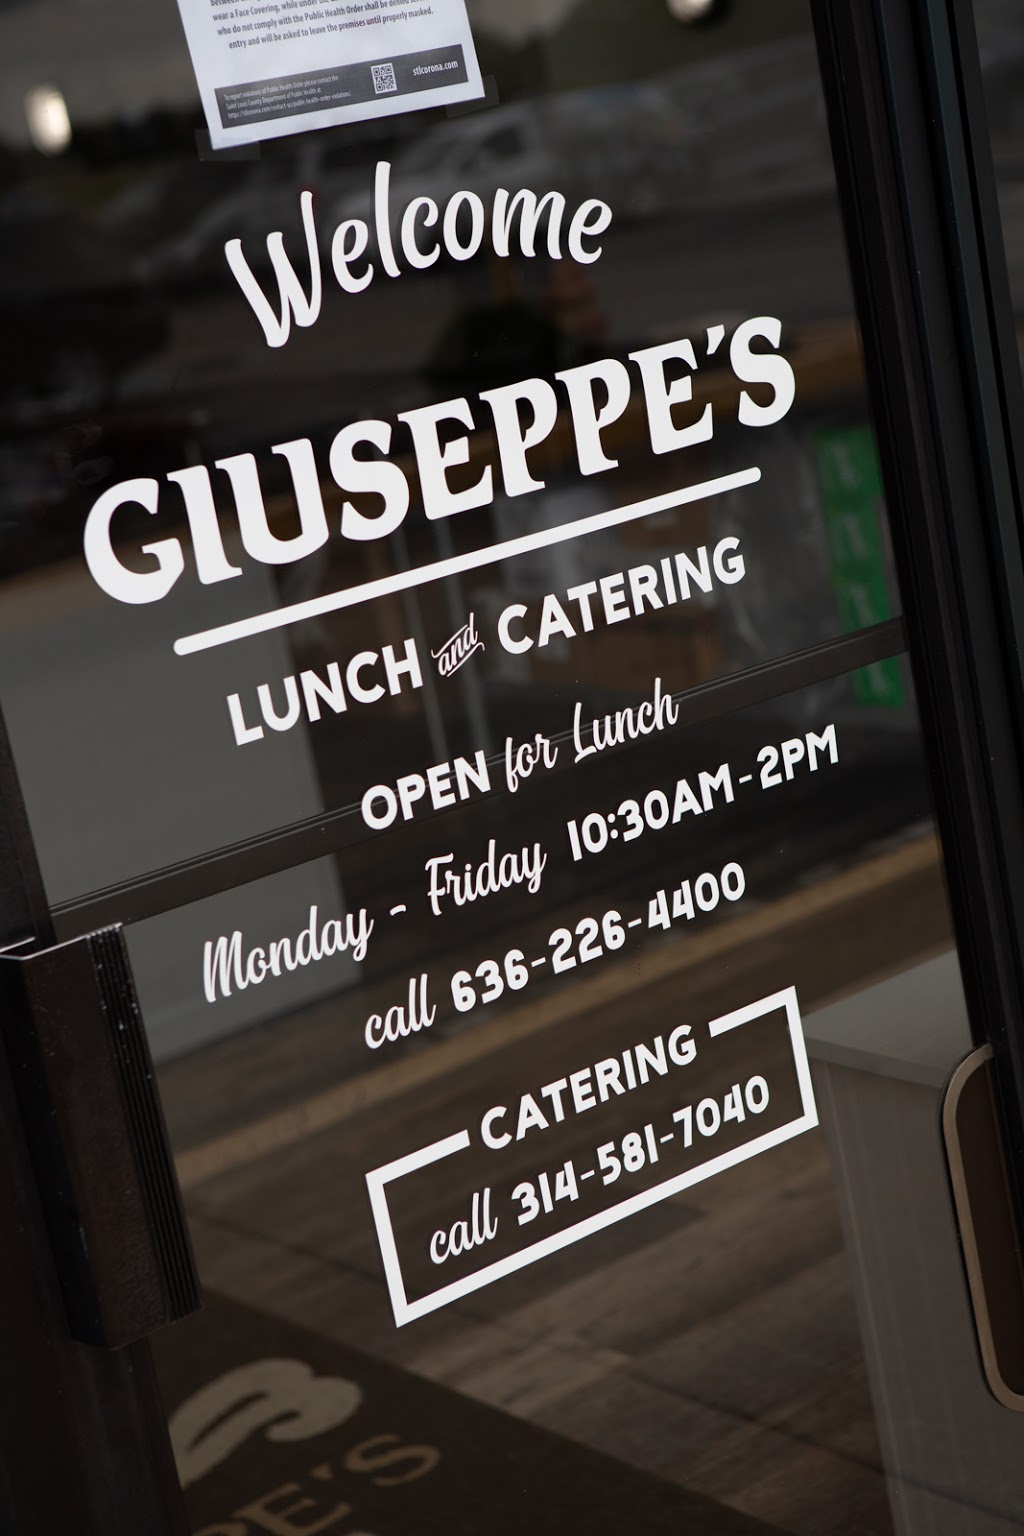 Giuseppes Restaurant and Catering | 972 S Hwy Dr, Fenton, MO 63026 | Phone: (636) 226-4400